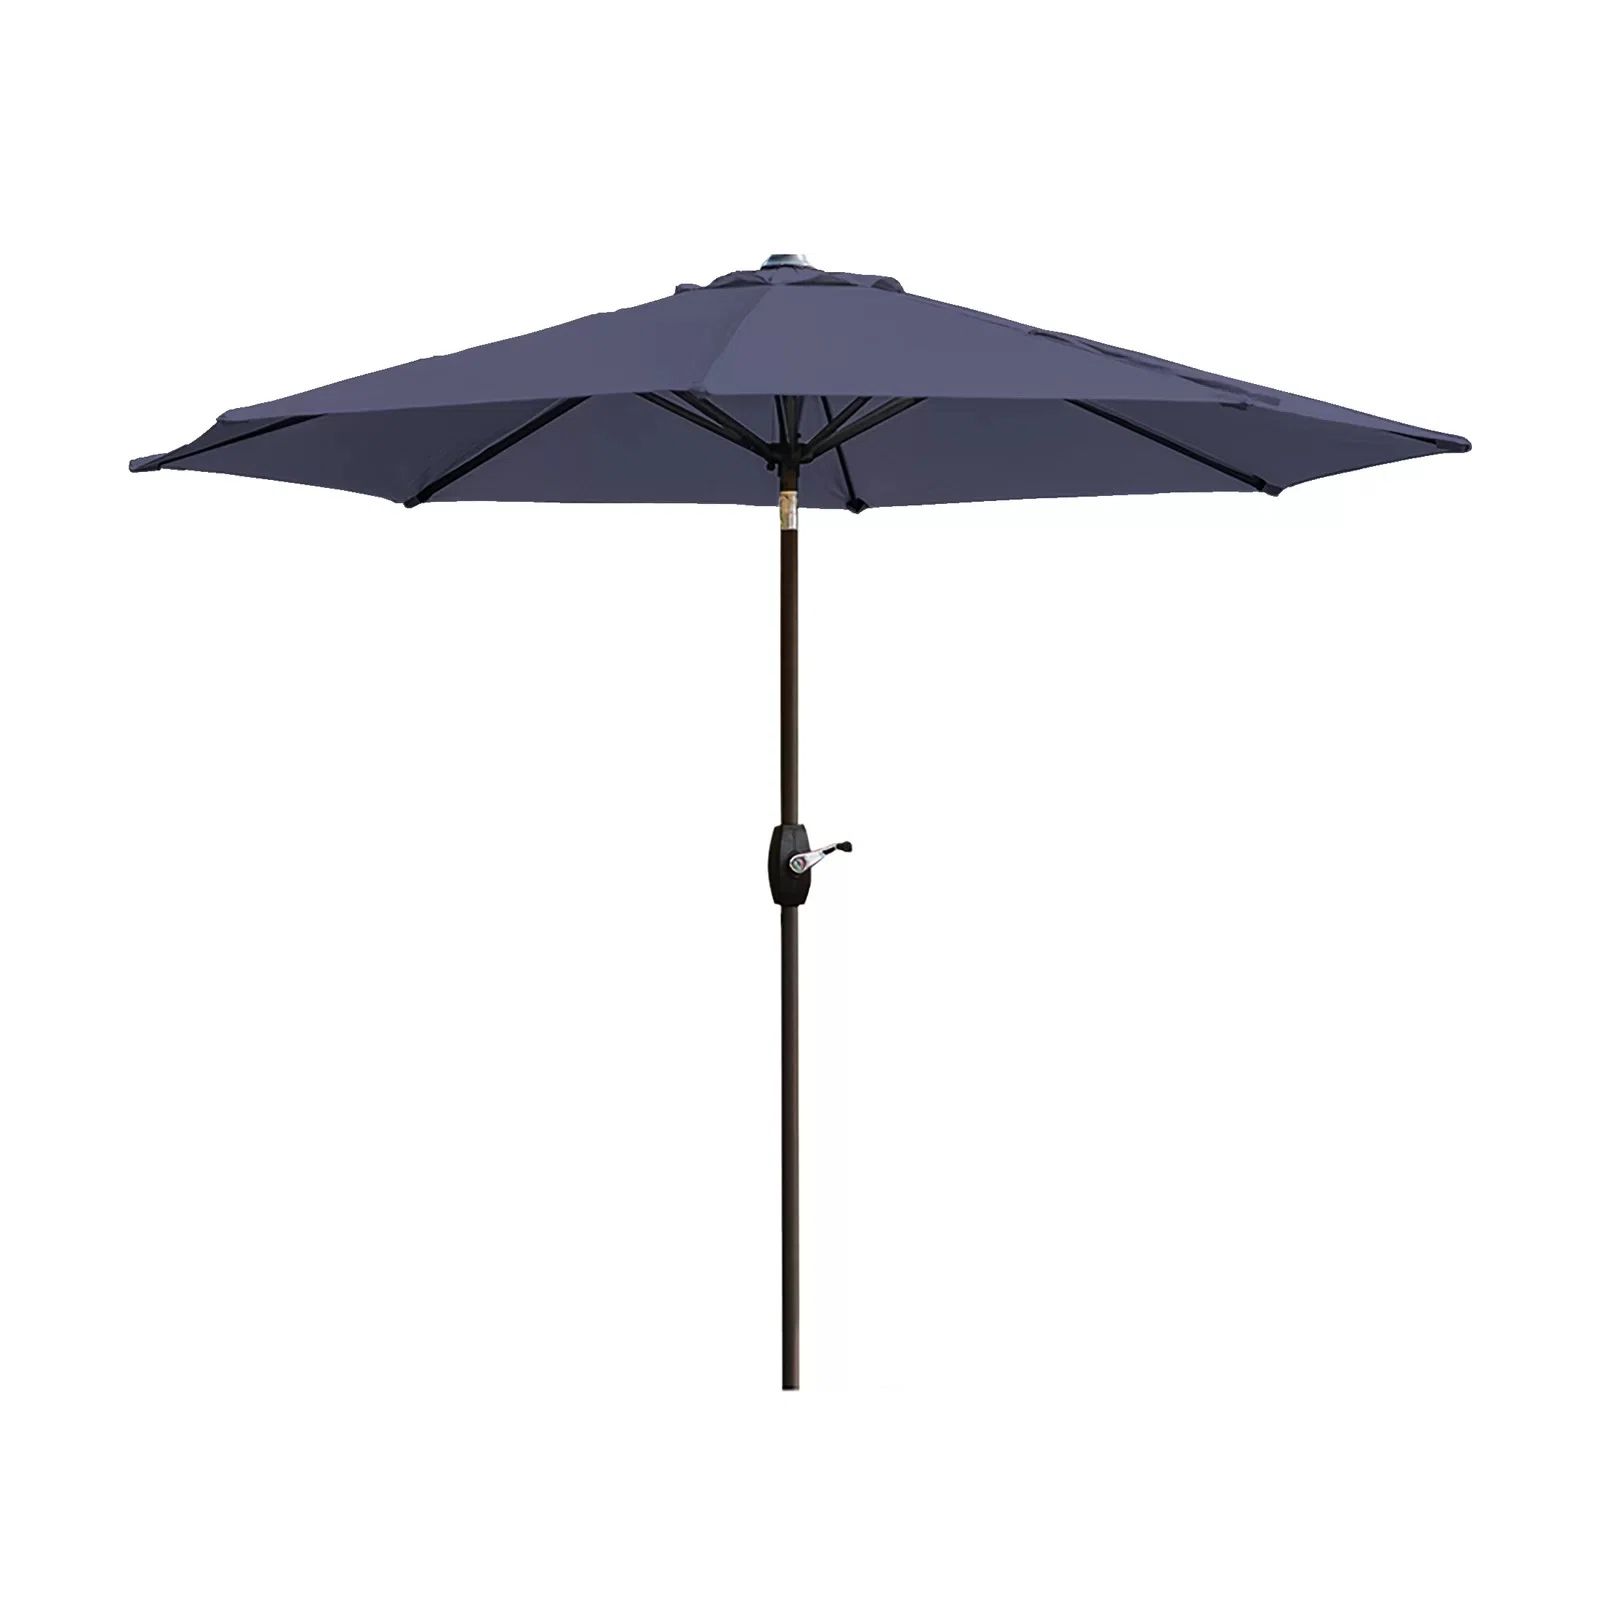 Cassia 9' Market UmbrellaSee More by Charlton Home®Rated 4.6 out of 5 stars.4.64380 Reviews$49.9... | Wayfair Professional